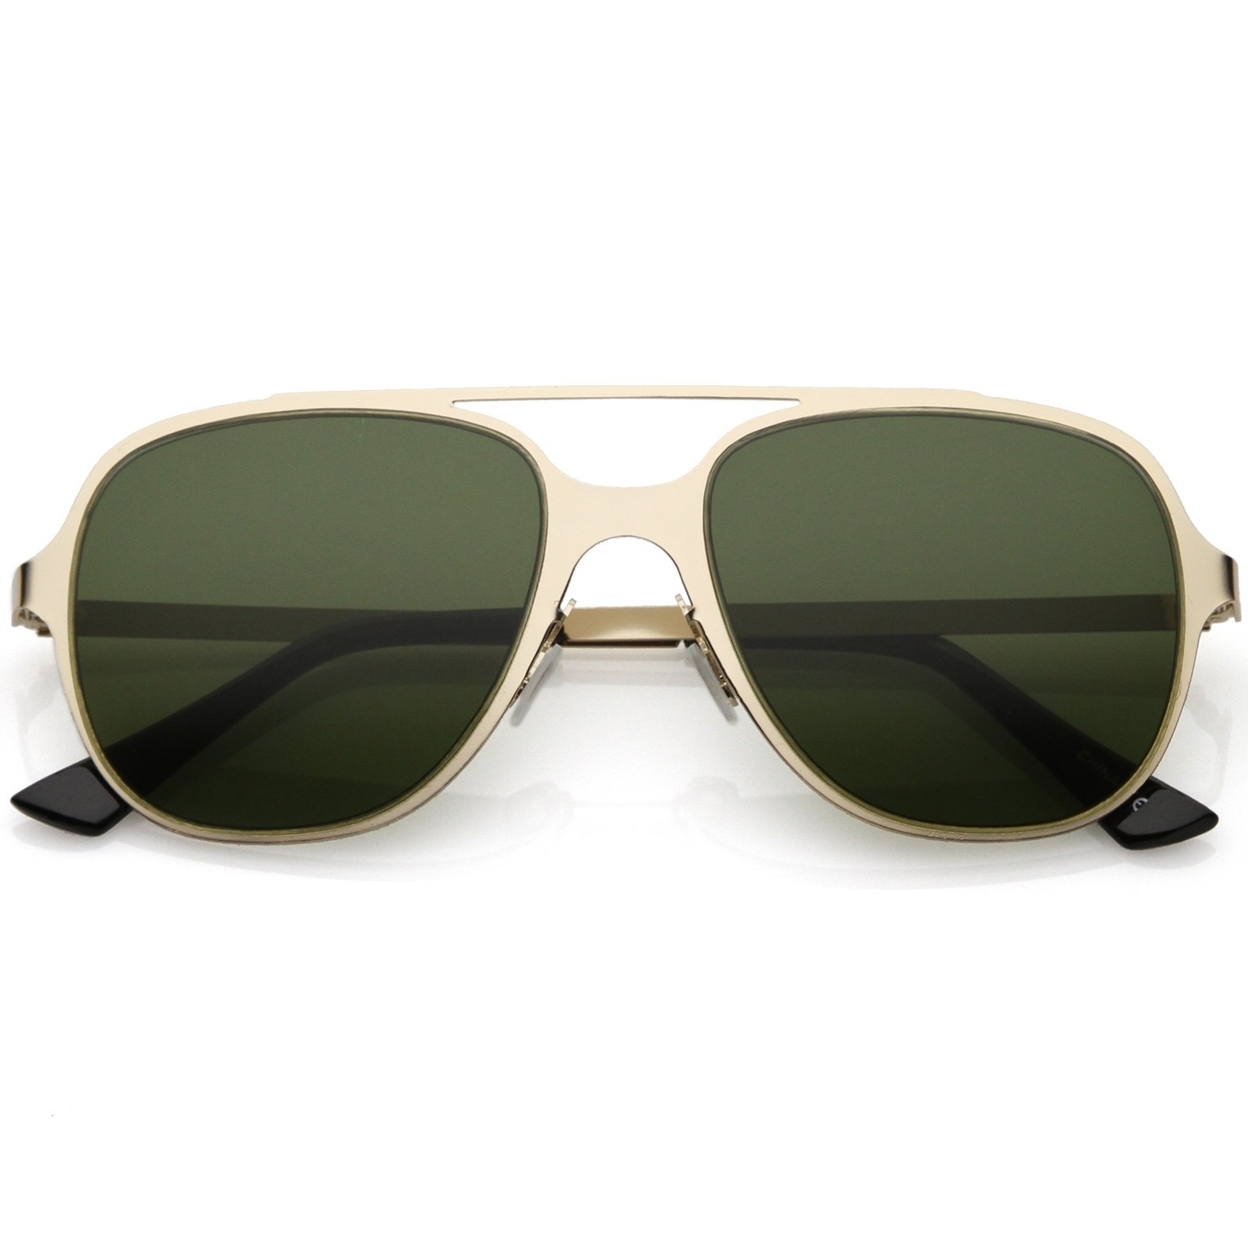 Sleek Metal Aviator Sunglasses With Double Crossbar Neutral Color Flat Lens 54mm - Gold / Green